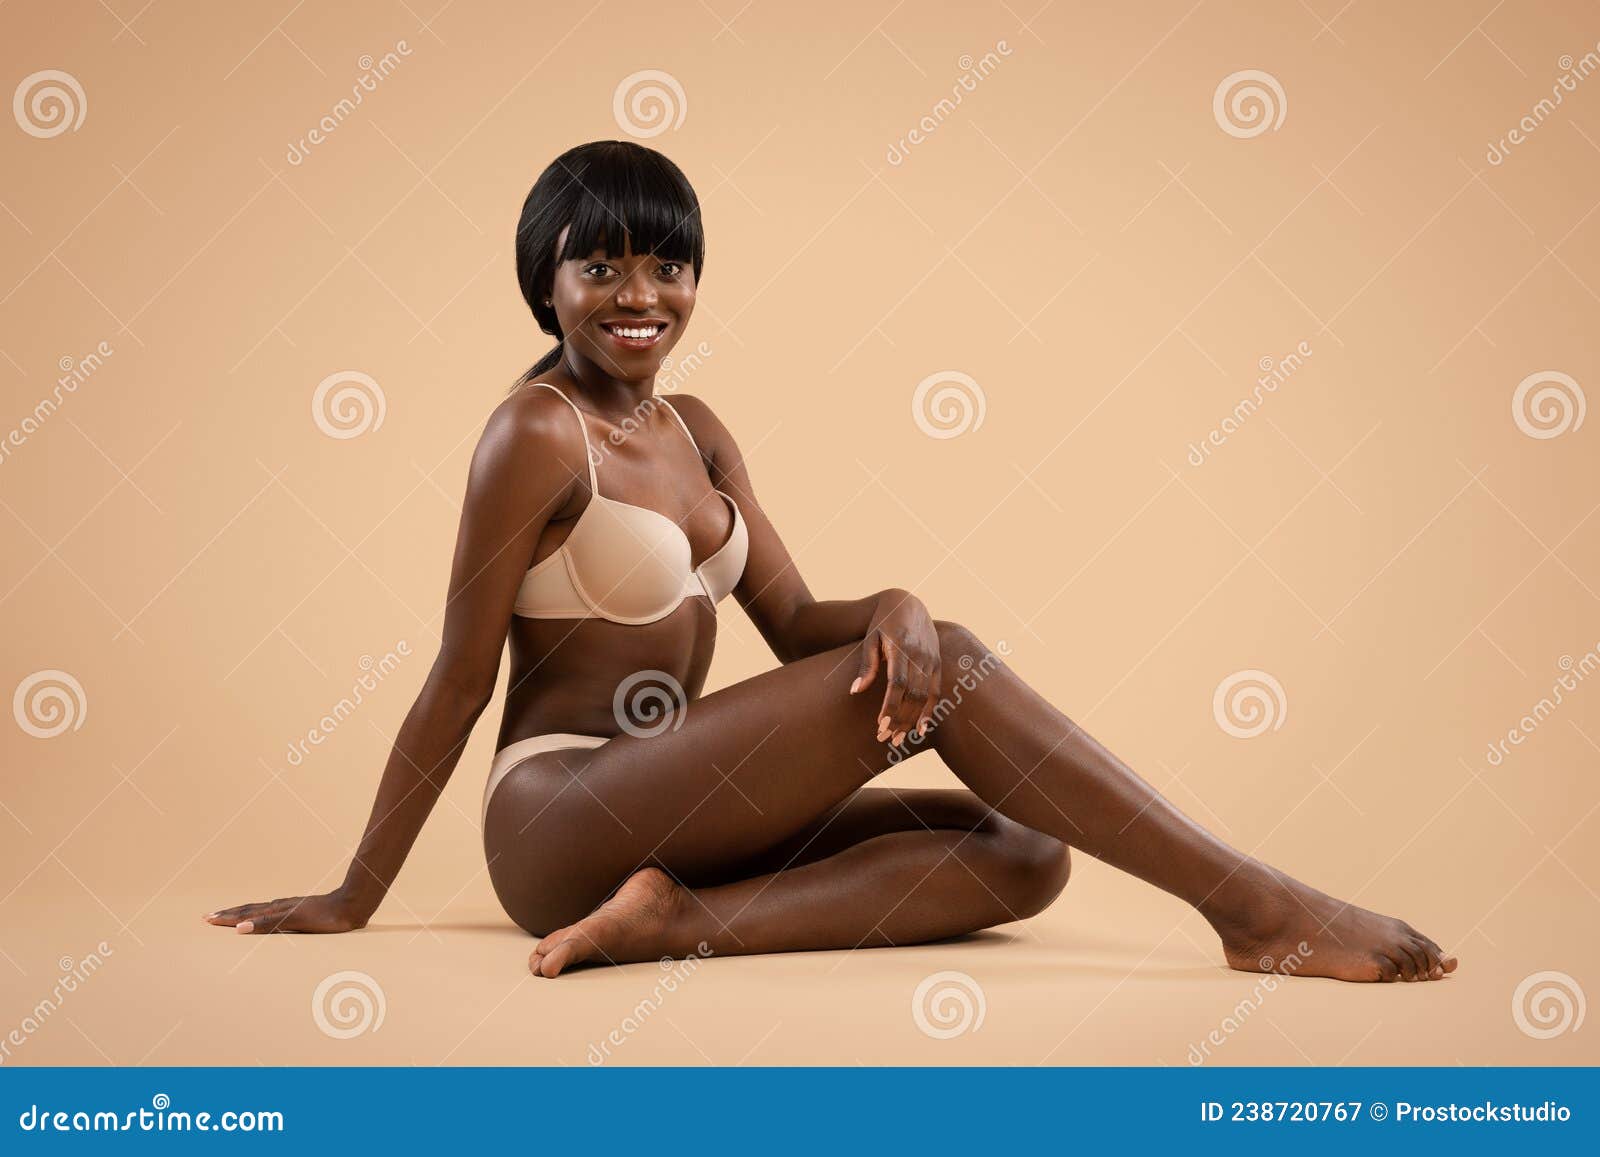 Cheerful Attractive Black Lady Posing in Underwear on Beige Stock Image -  Image of shirtless, pretty: 238720767